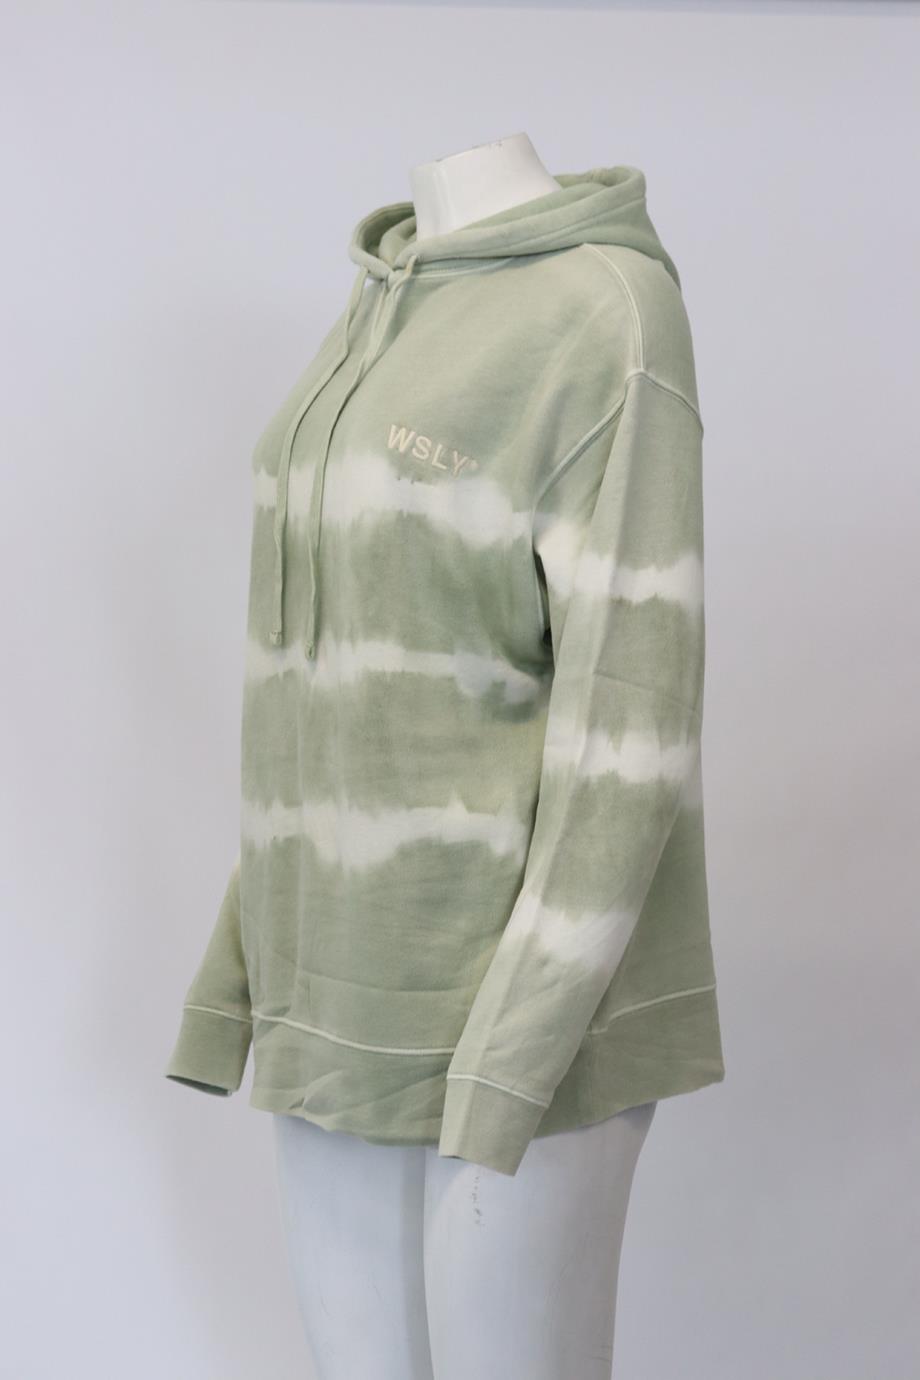 WSLY TIE DYED COTTON JERSEY HOODIE SMALL